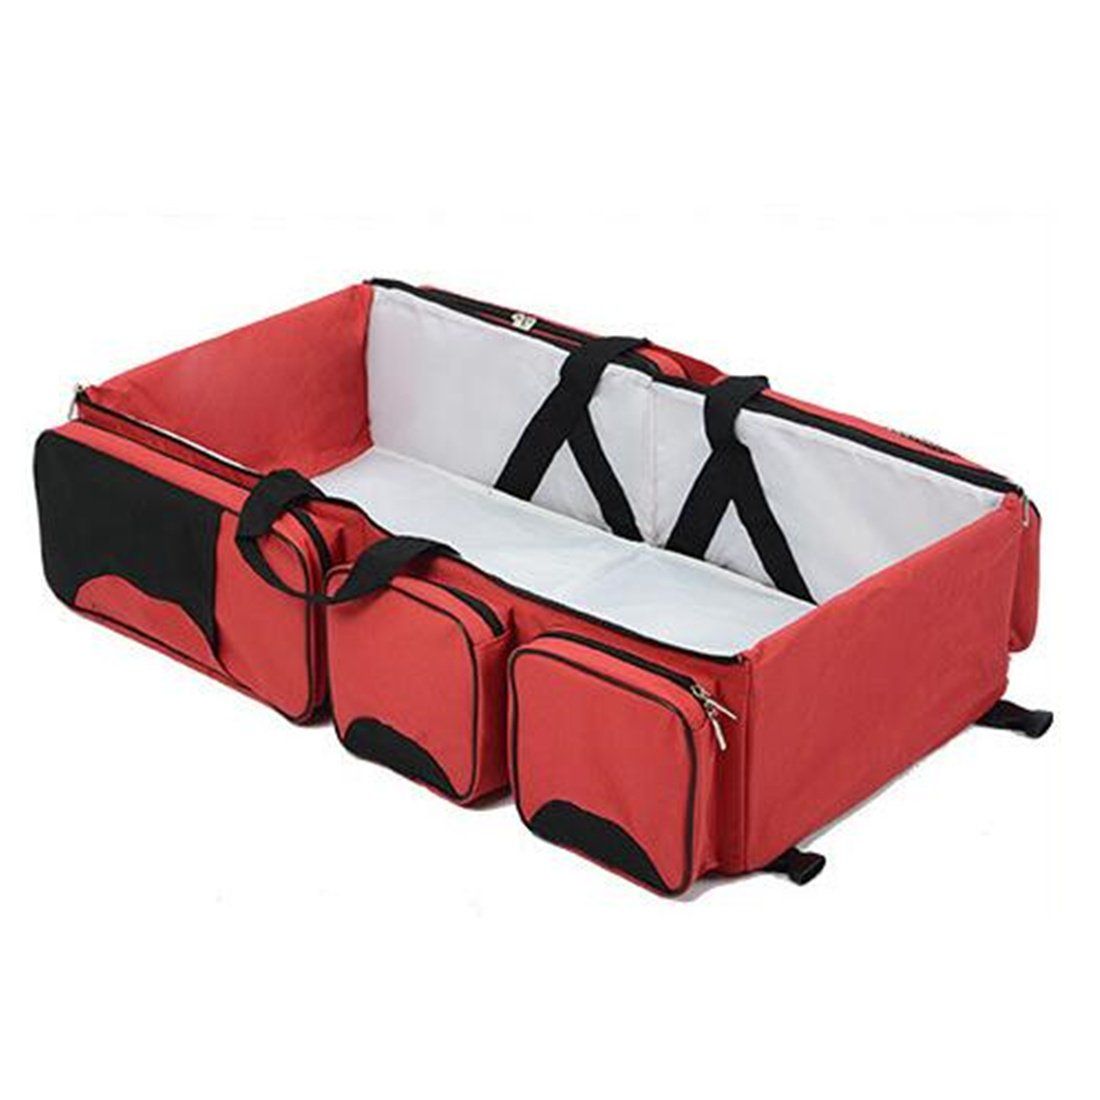 Multi-function Portable Travel Bed - Red | Buy Online in South Africa ...